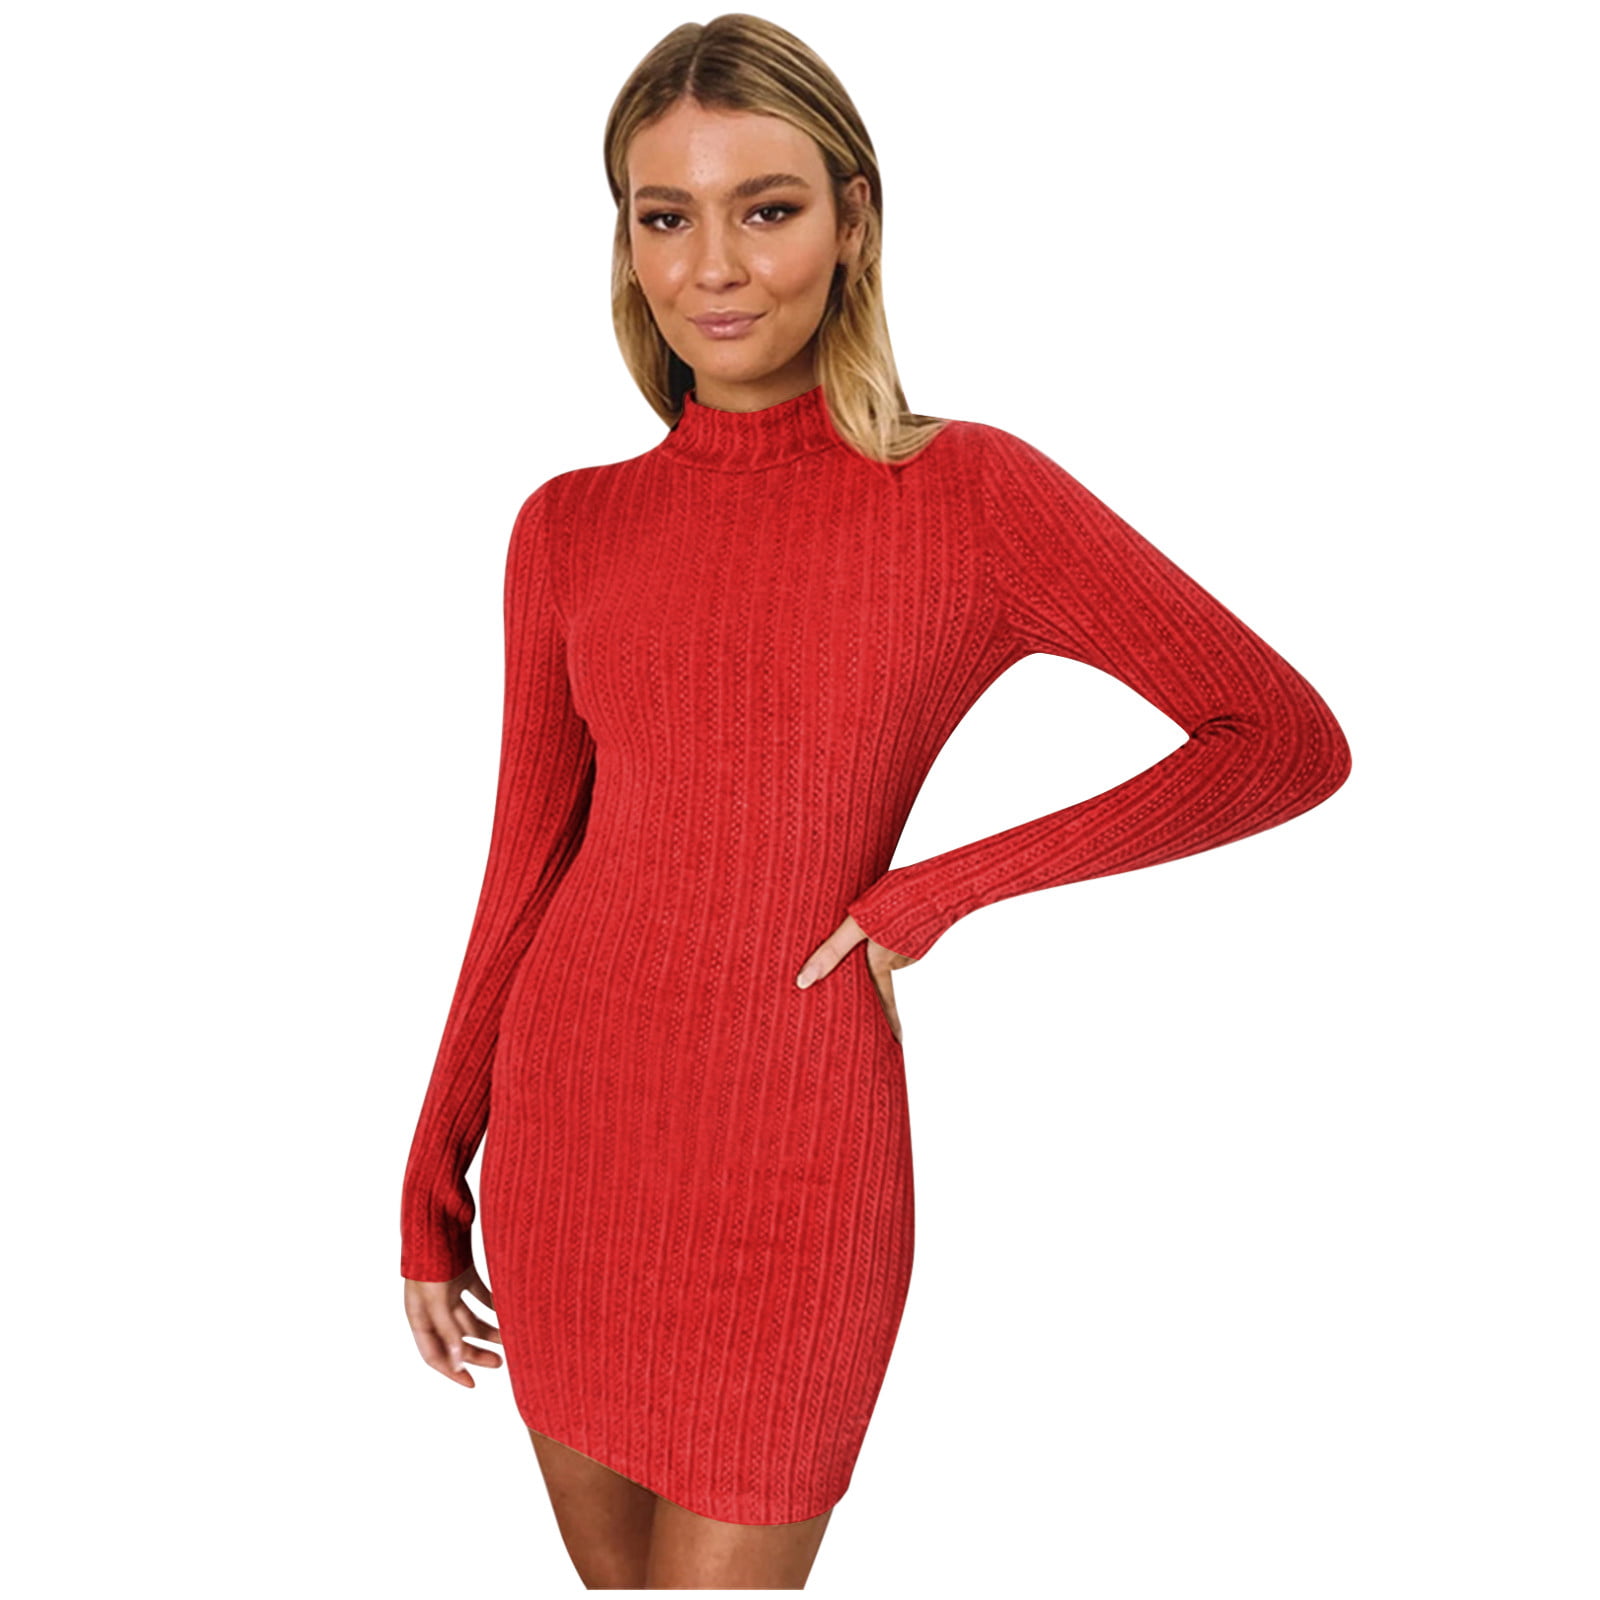 red casual dress